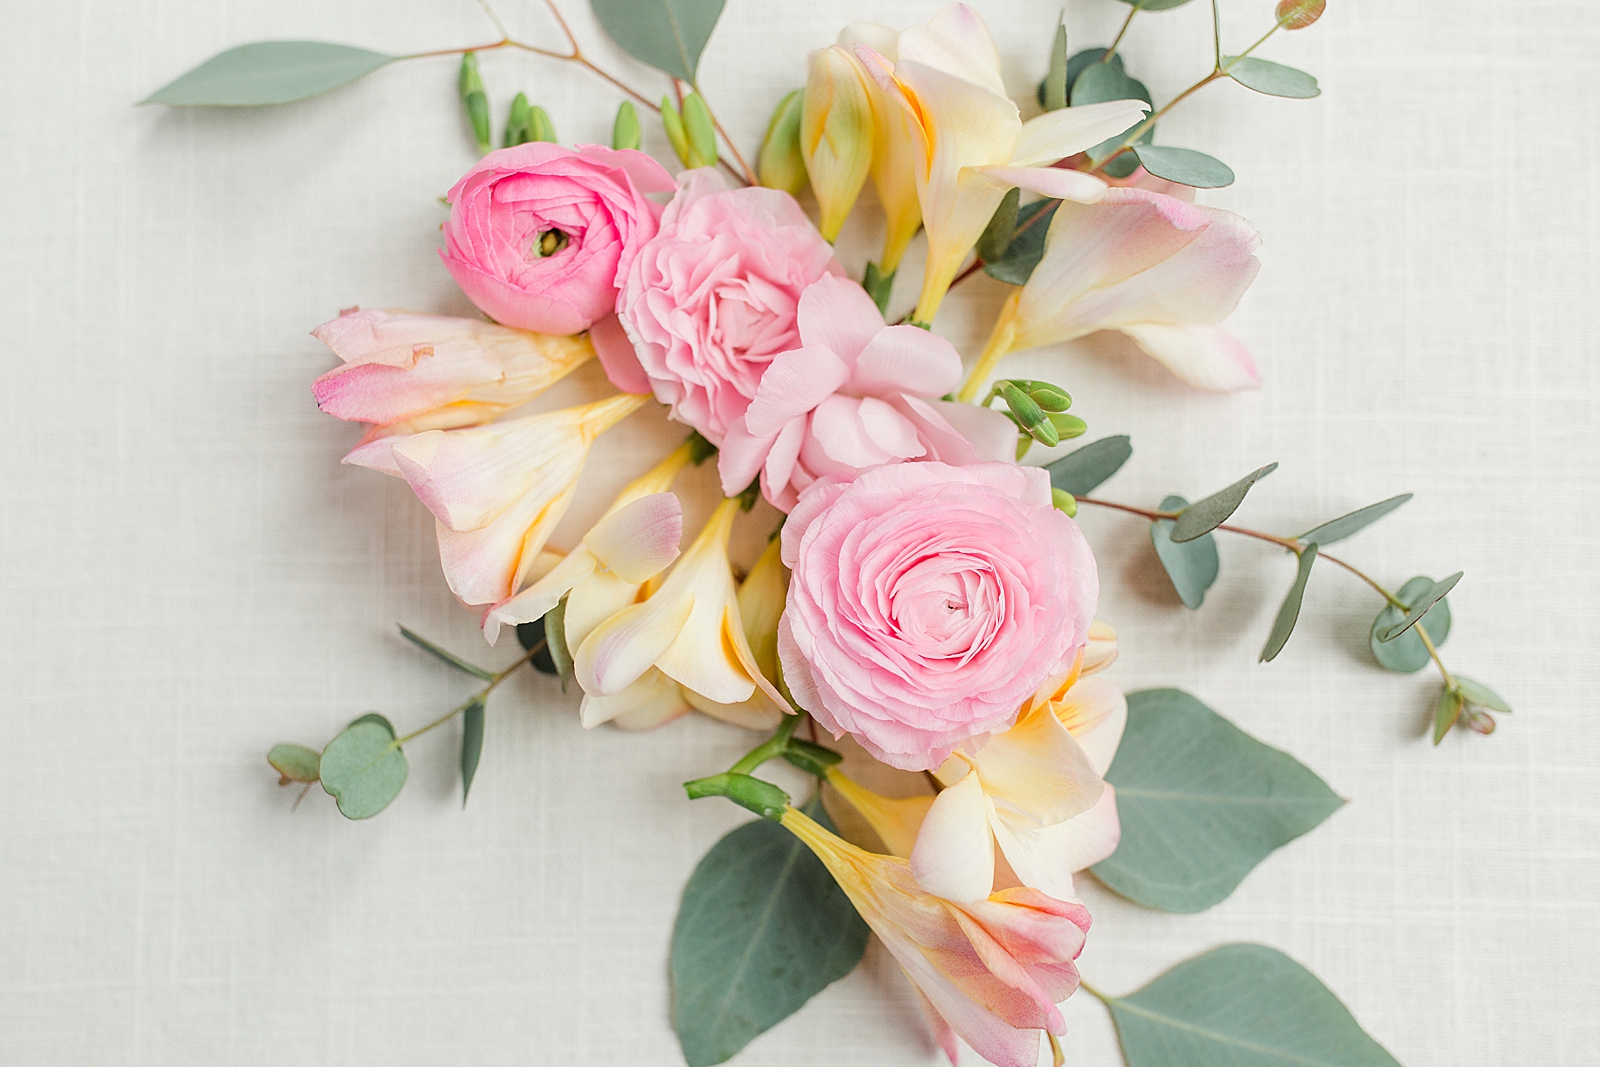 Hackney Warehouse Wedding Flower detail with garden roses and ranunculus Photo